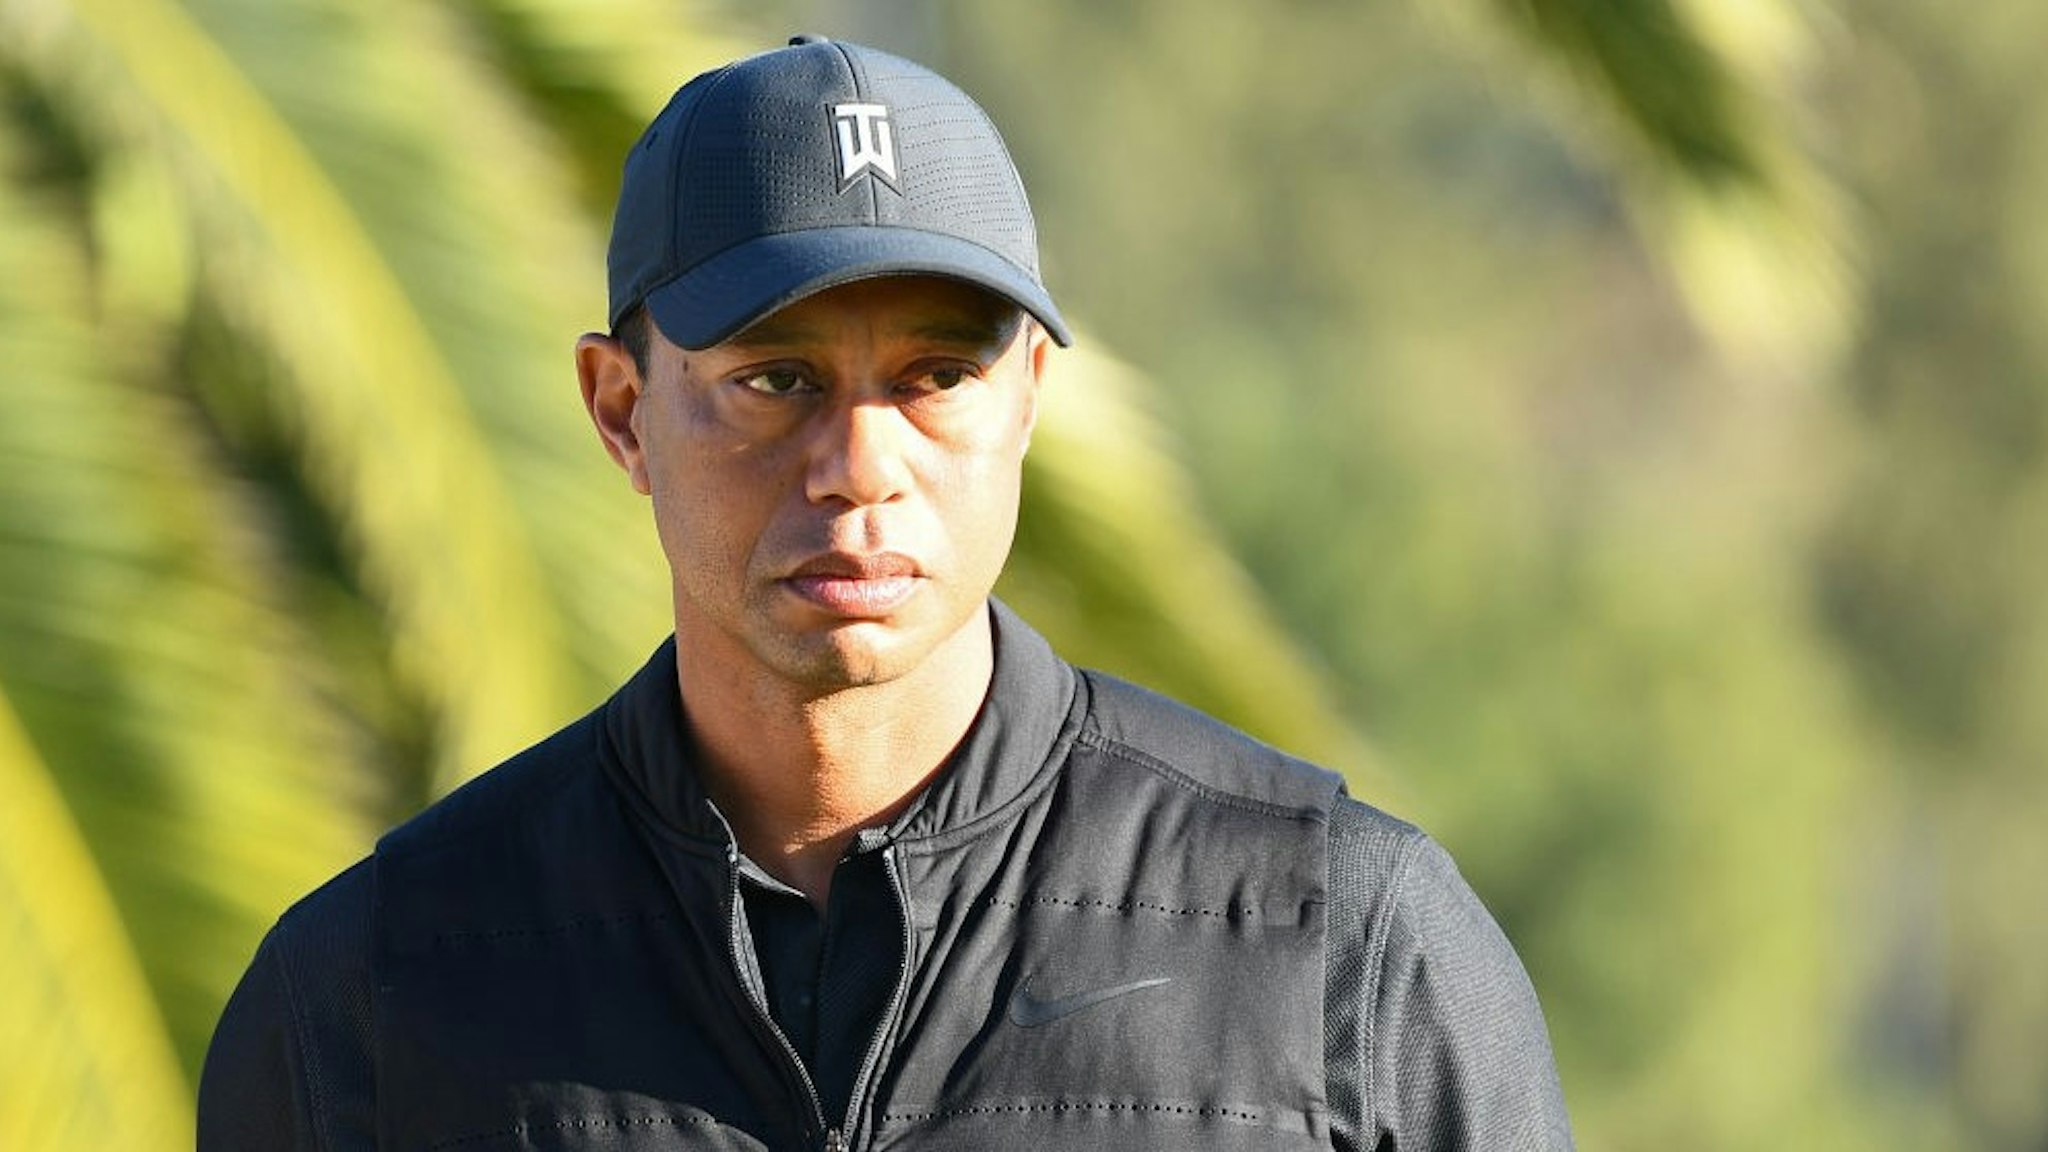 PACIFIC PALISADES, CA - FEBRUARY 21: Tiger Woods looks on from the 18th hole during the final round of The Genesis Invitational golf tournament at the Riviera Country Club in Pacific Palisades, CA on February 21, 2021. The tournament was played without fans due to the COVID-19 pandemic.(Photo by